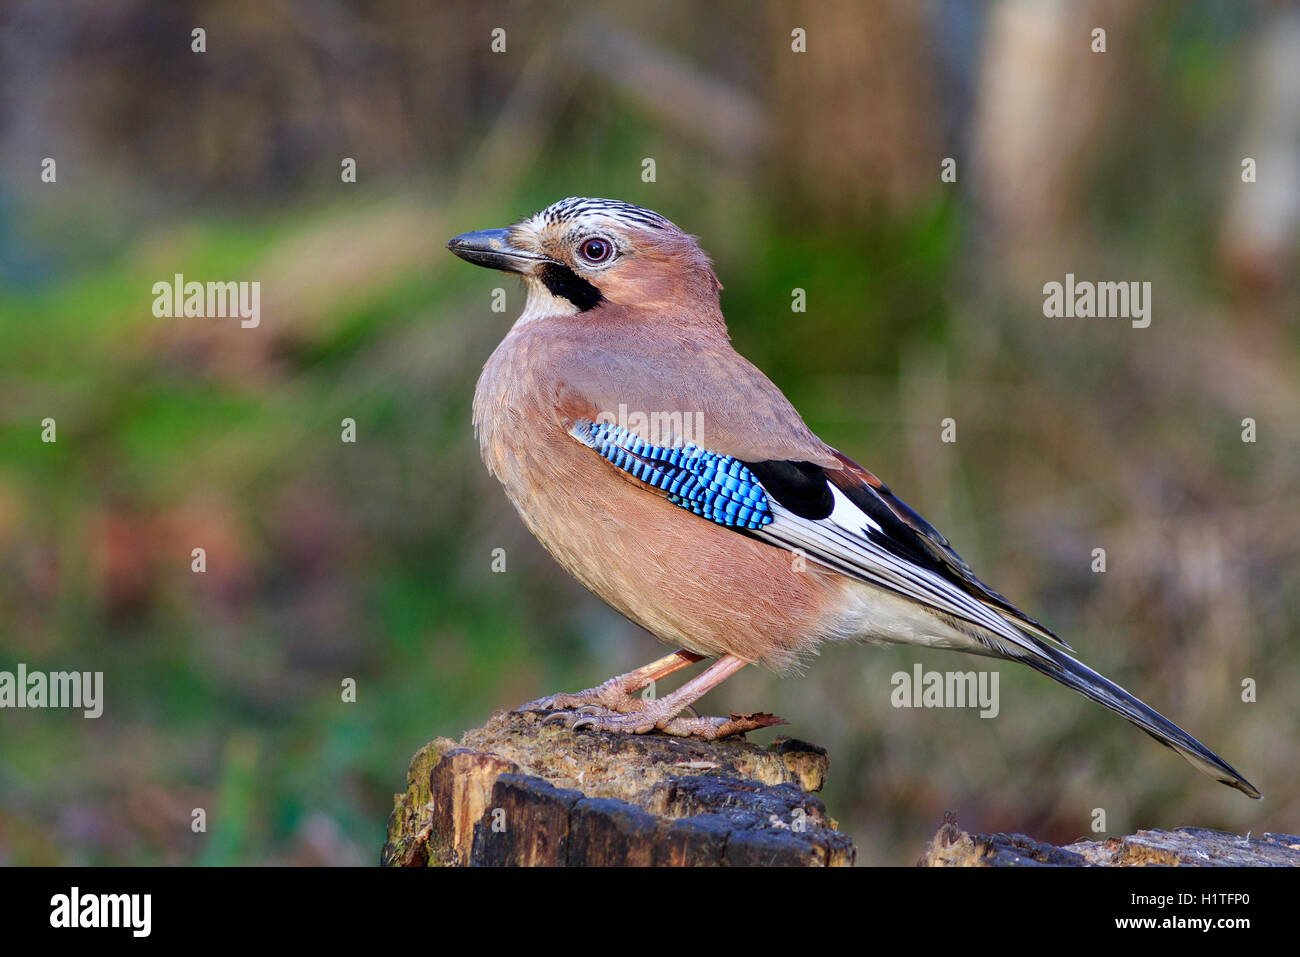 Jay perched on a tree stump close-up Stock Photo